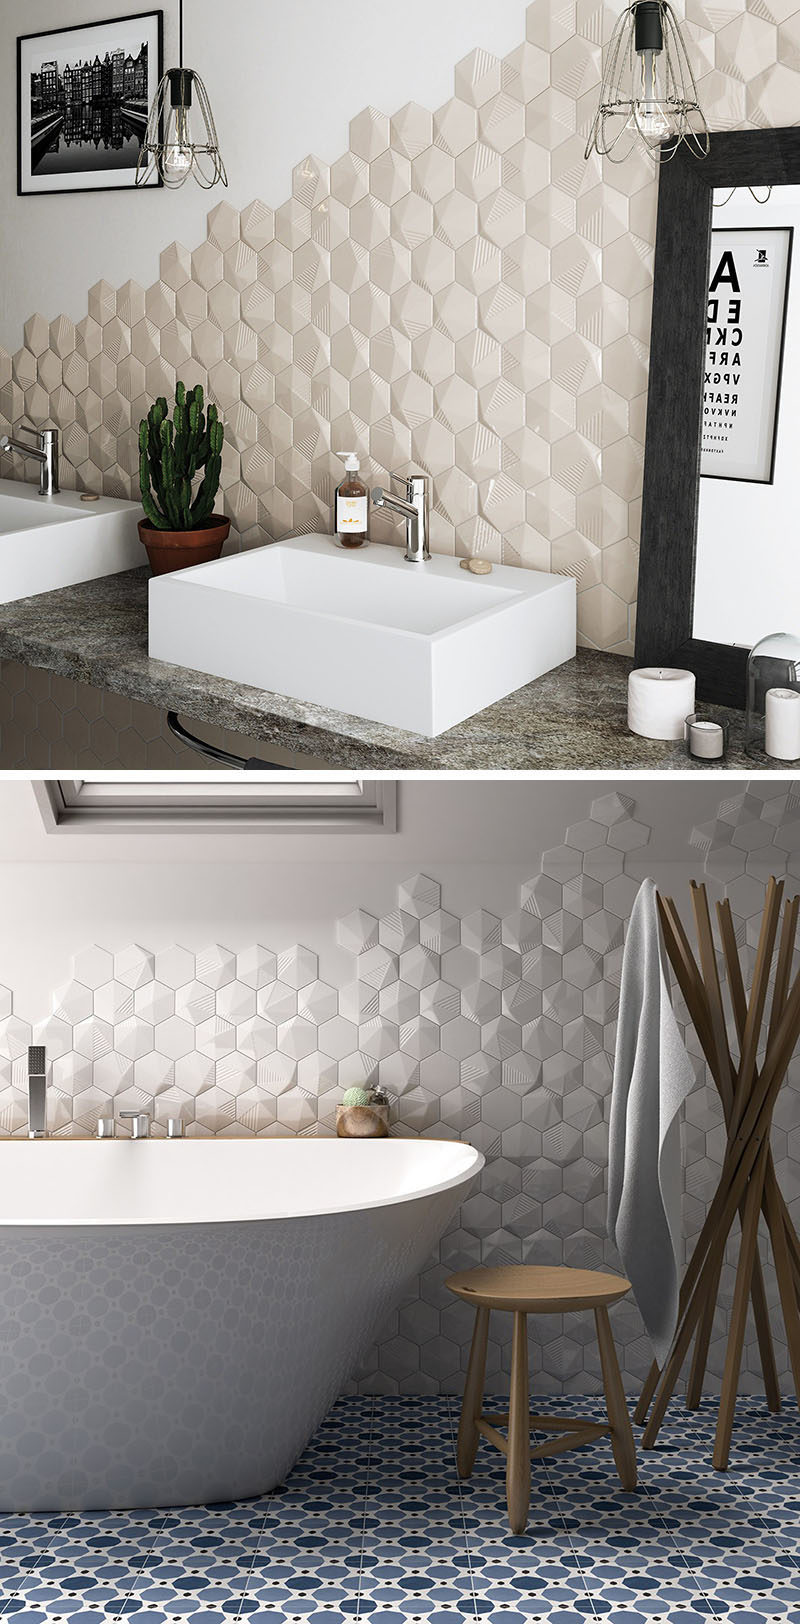 Bathroom Tile Ideas - Install 3D Tiles To Add Texture To Your Bathroom // Hexagonal tiles with a bit of texture added to them and arranged on only parts of the walls lets you add depth to your walls in a stylish way that doesn't feel overwhelming.